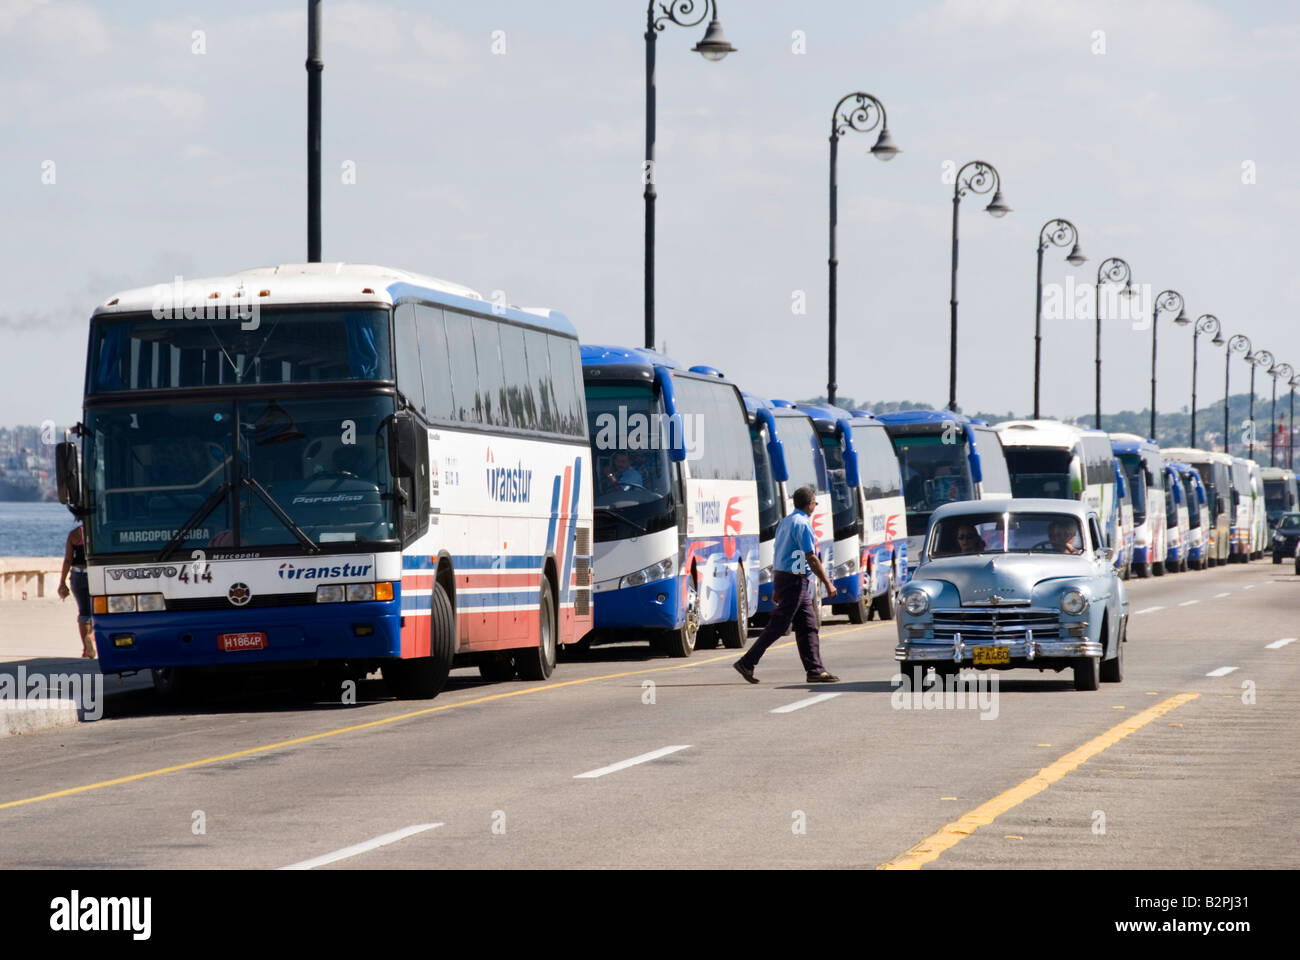 Row of state owned Transtur tourist buses parked on El Malecon in La Habana Vieja Cuba Stock Photo